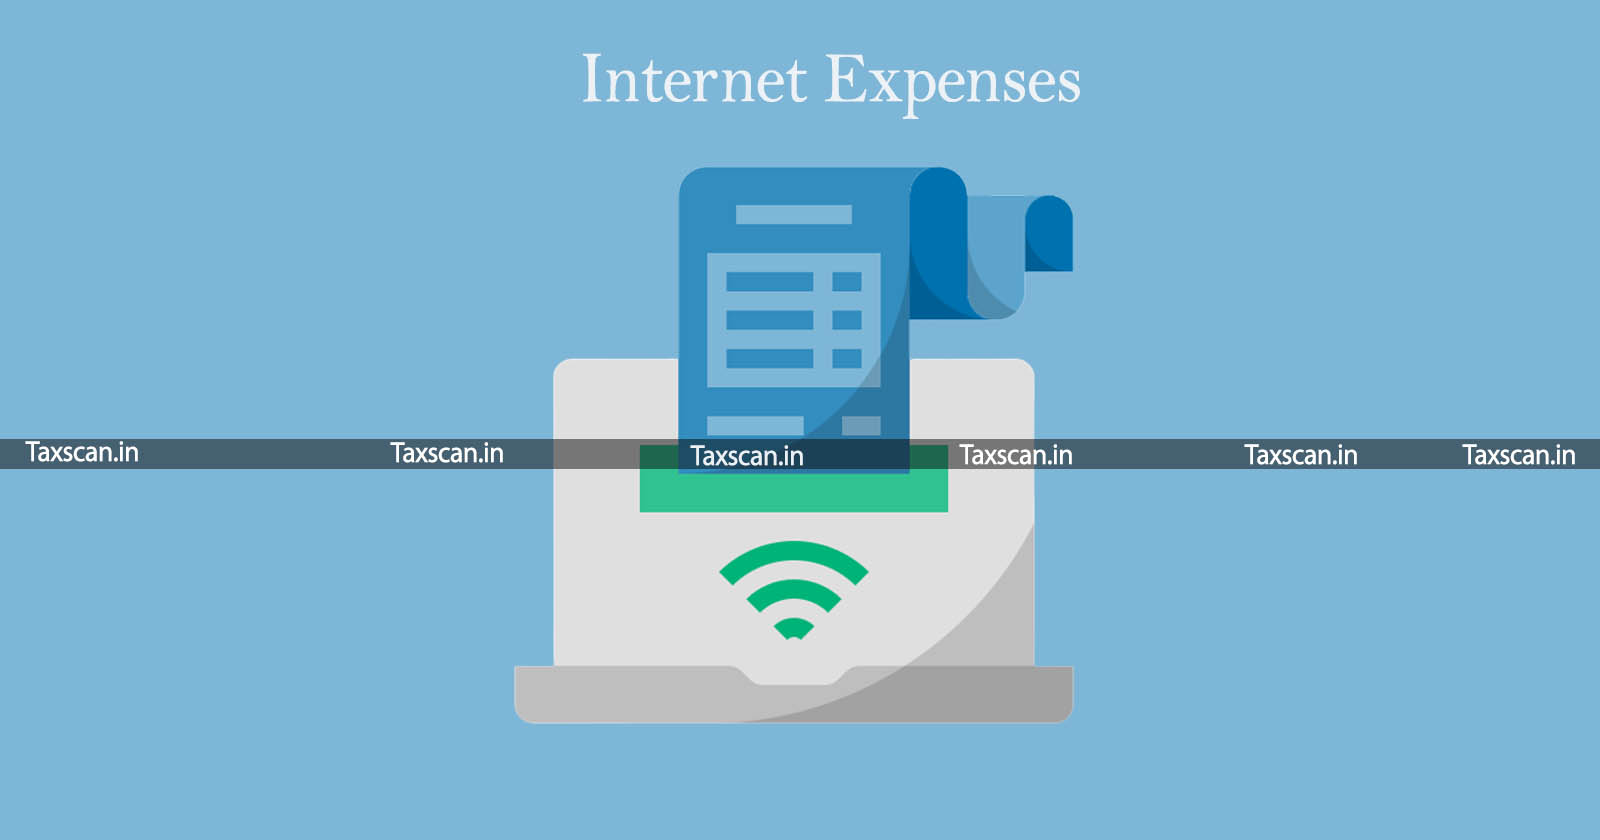 Internet Expenses - Labour Charges - Business Expenses - ITAT - Income Tax - taxscan